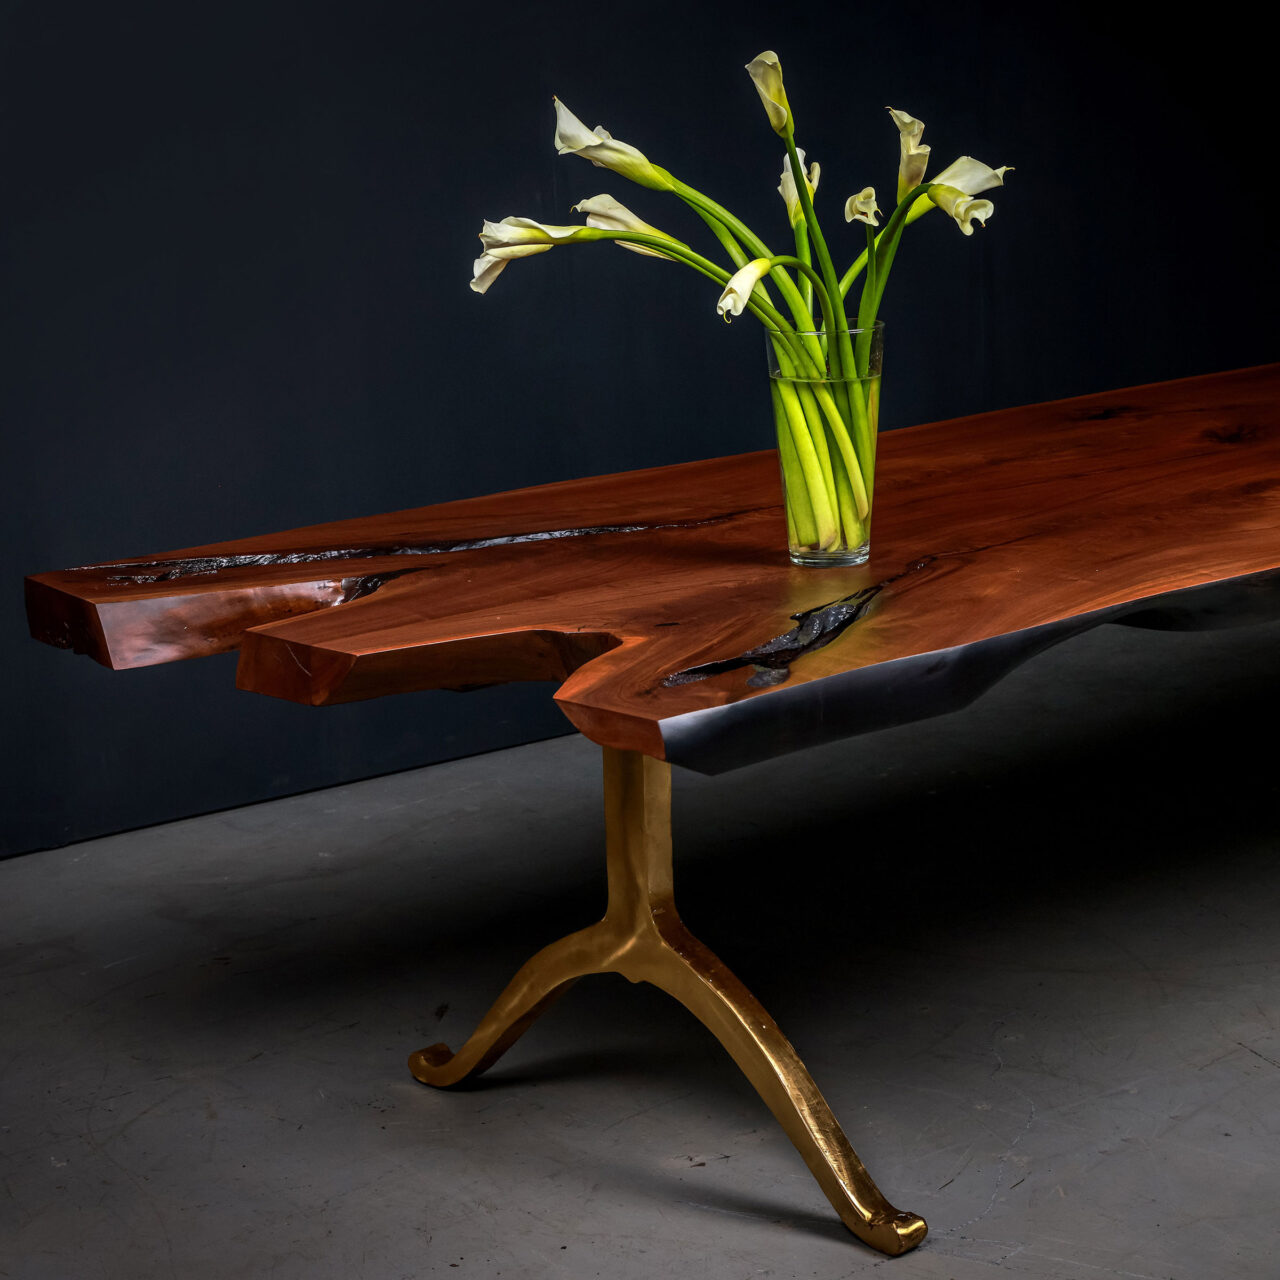 A luxury live edge dining table by SENTIENT Furniture, with a rich wooden top and contrasting golden metal legs, elegantly adorned with a glass vase of white calla lilies.